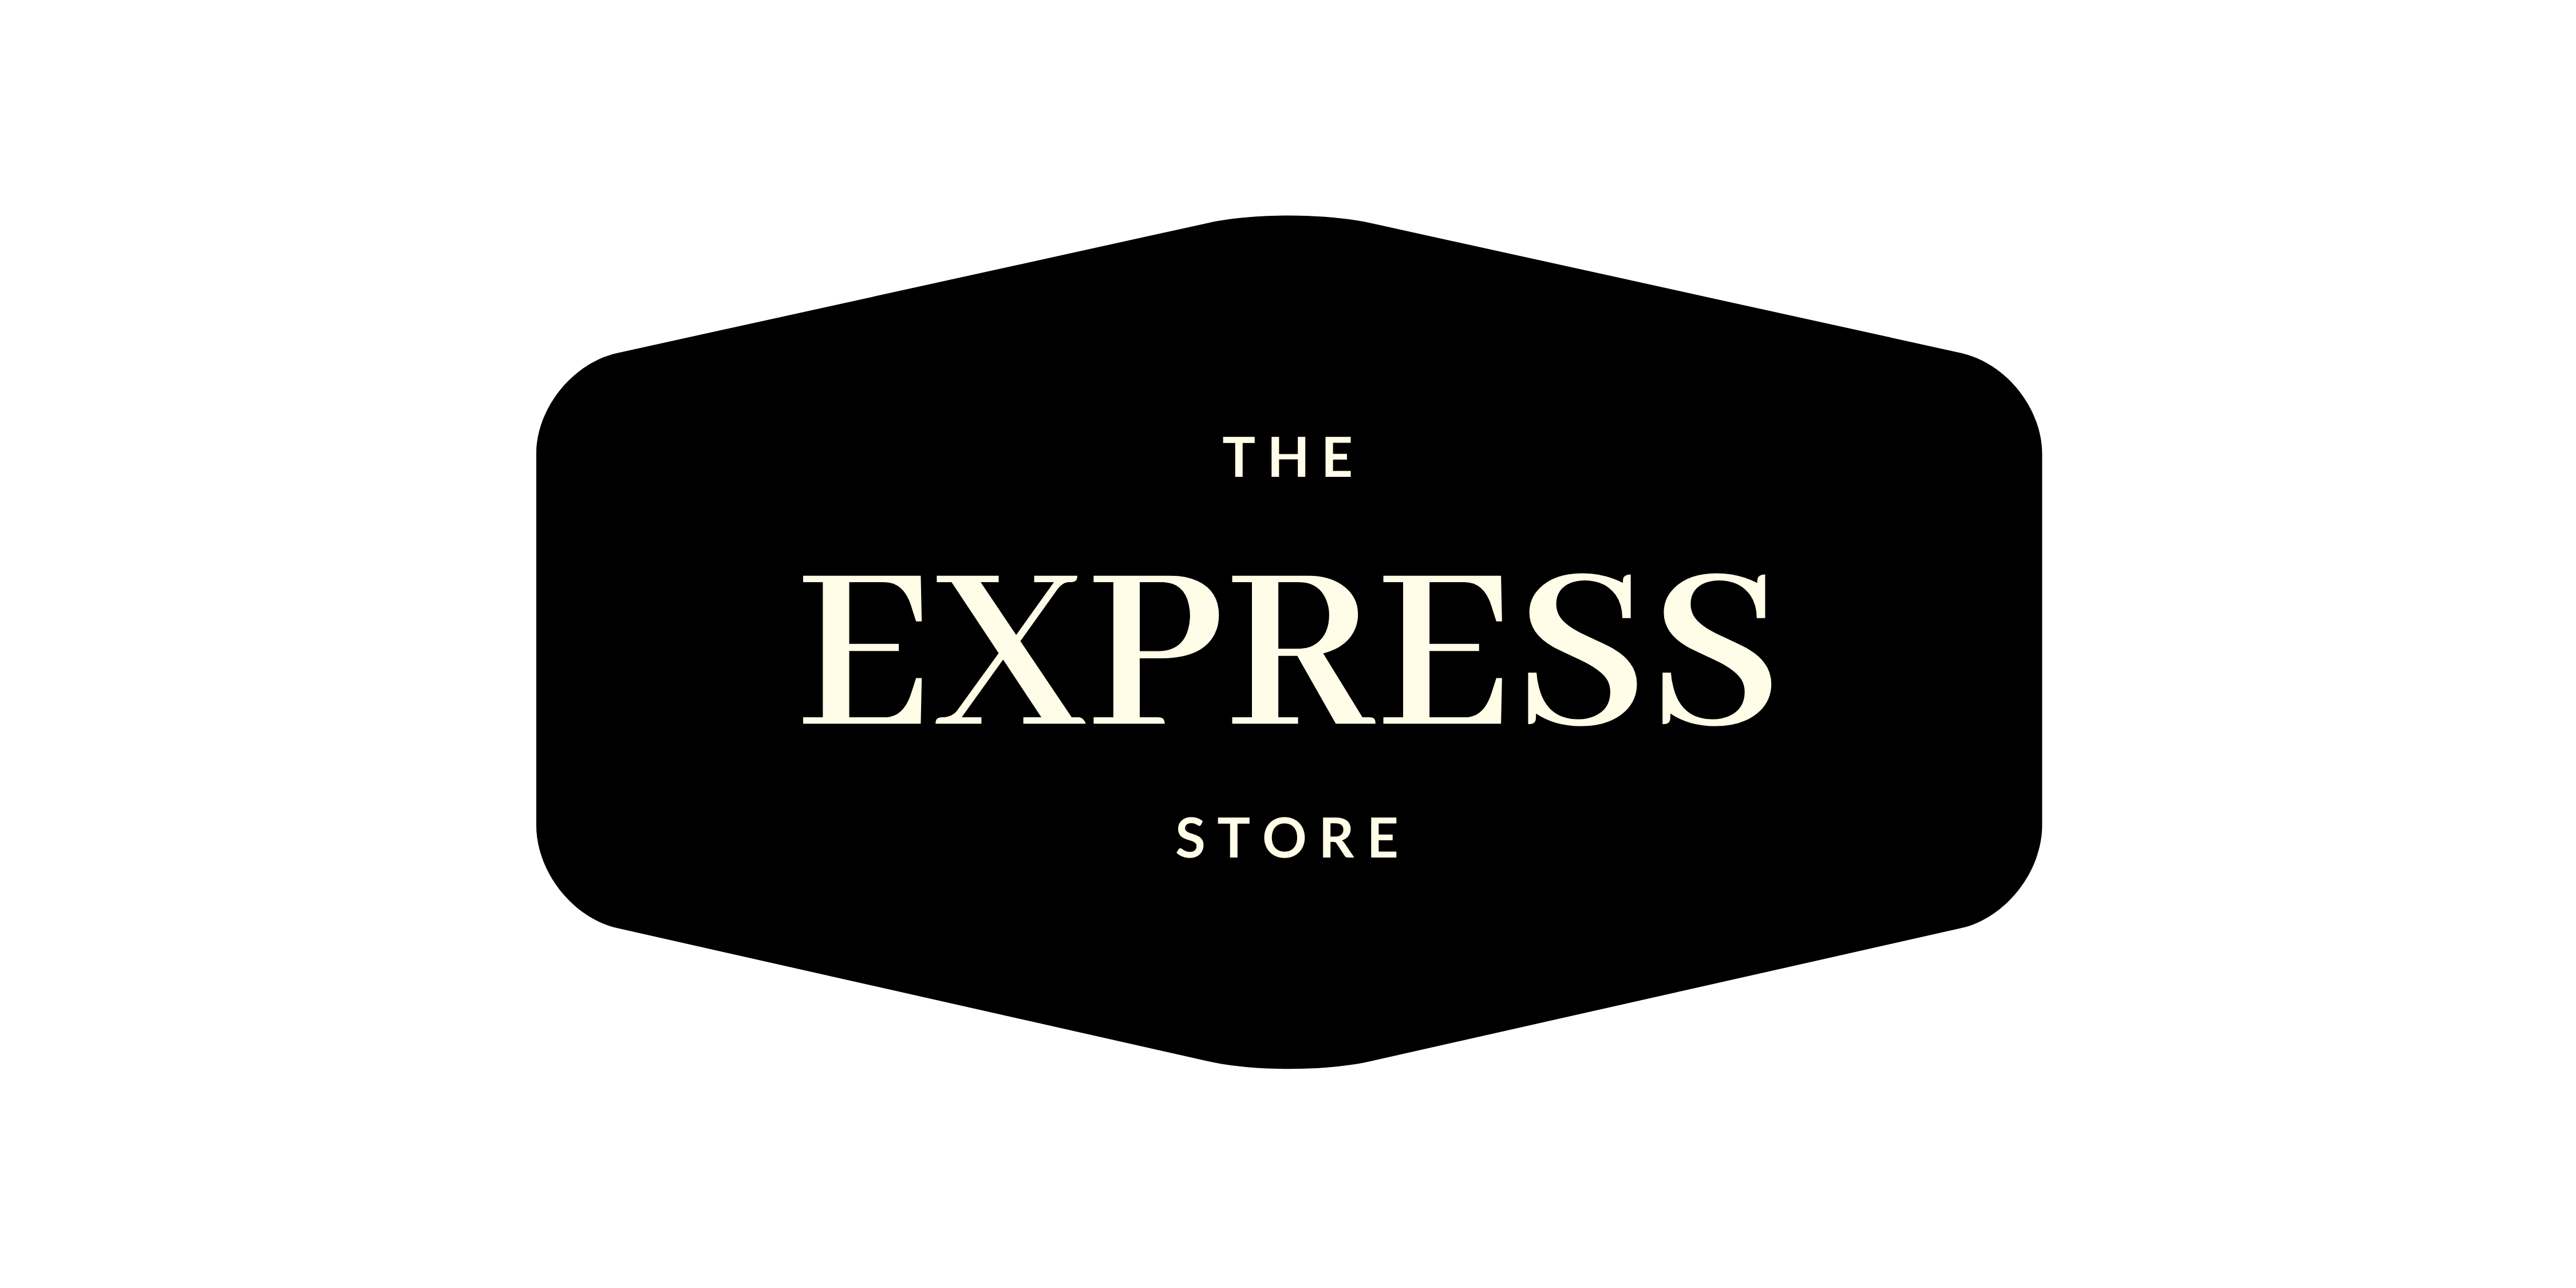 The Express Store